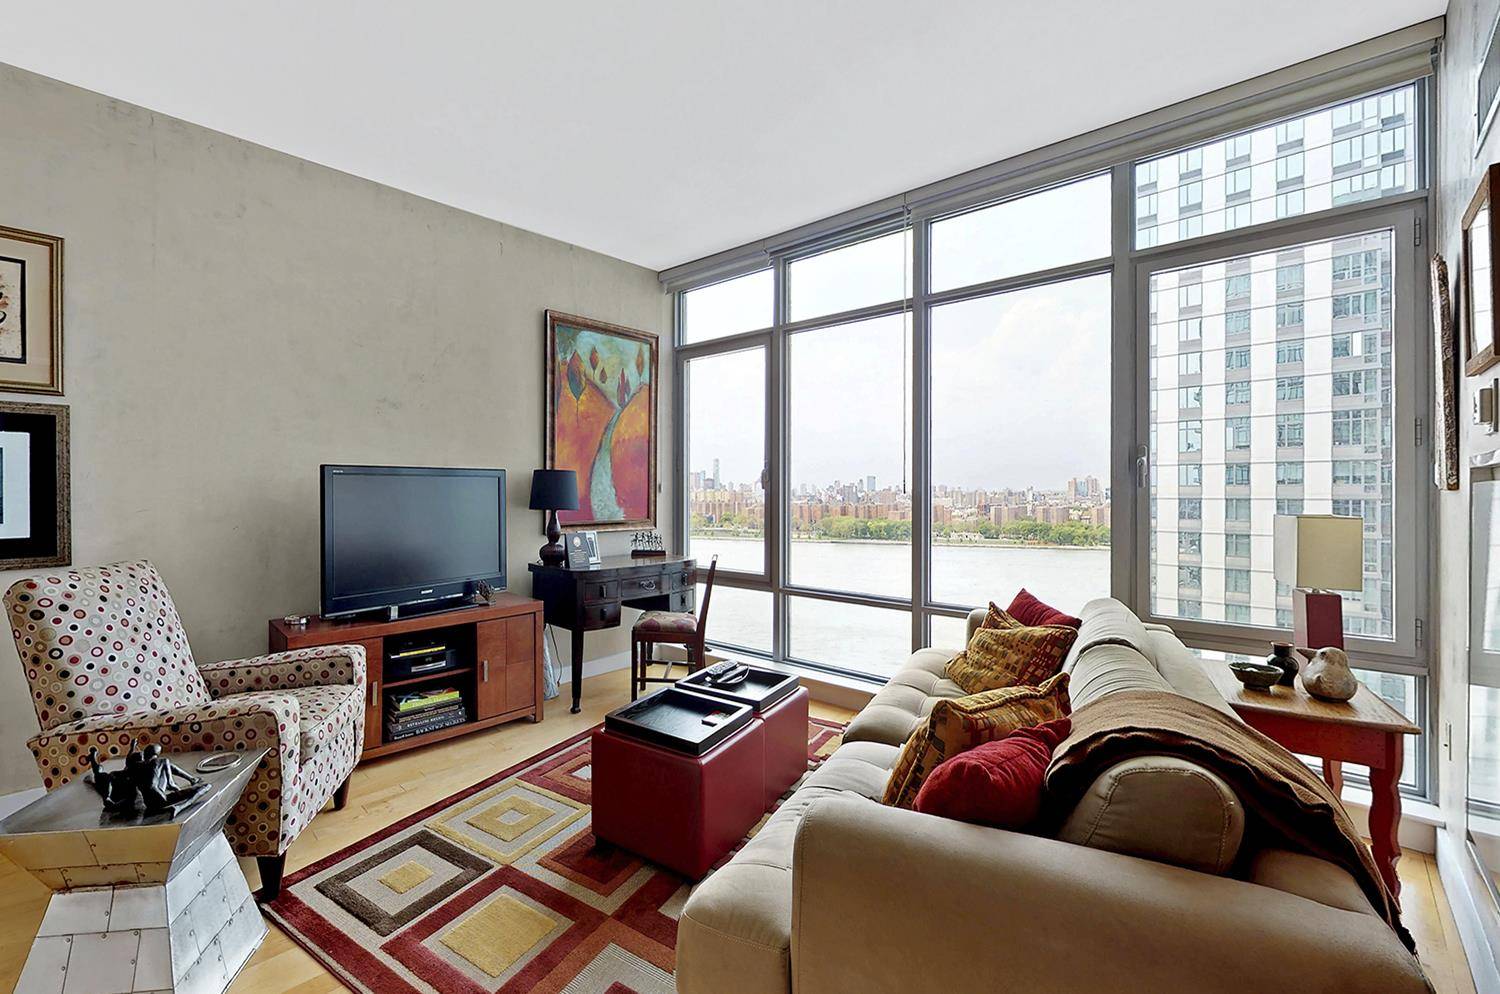 Welcome to luxury living by the East river.